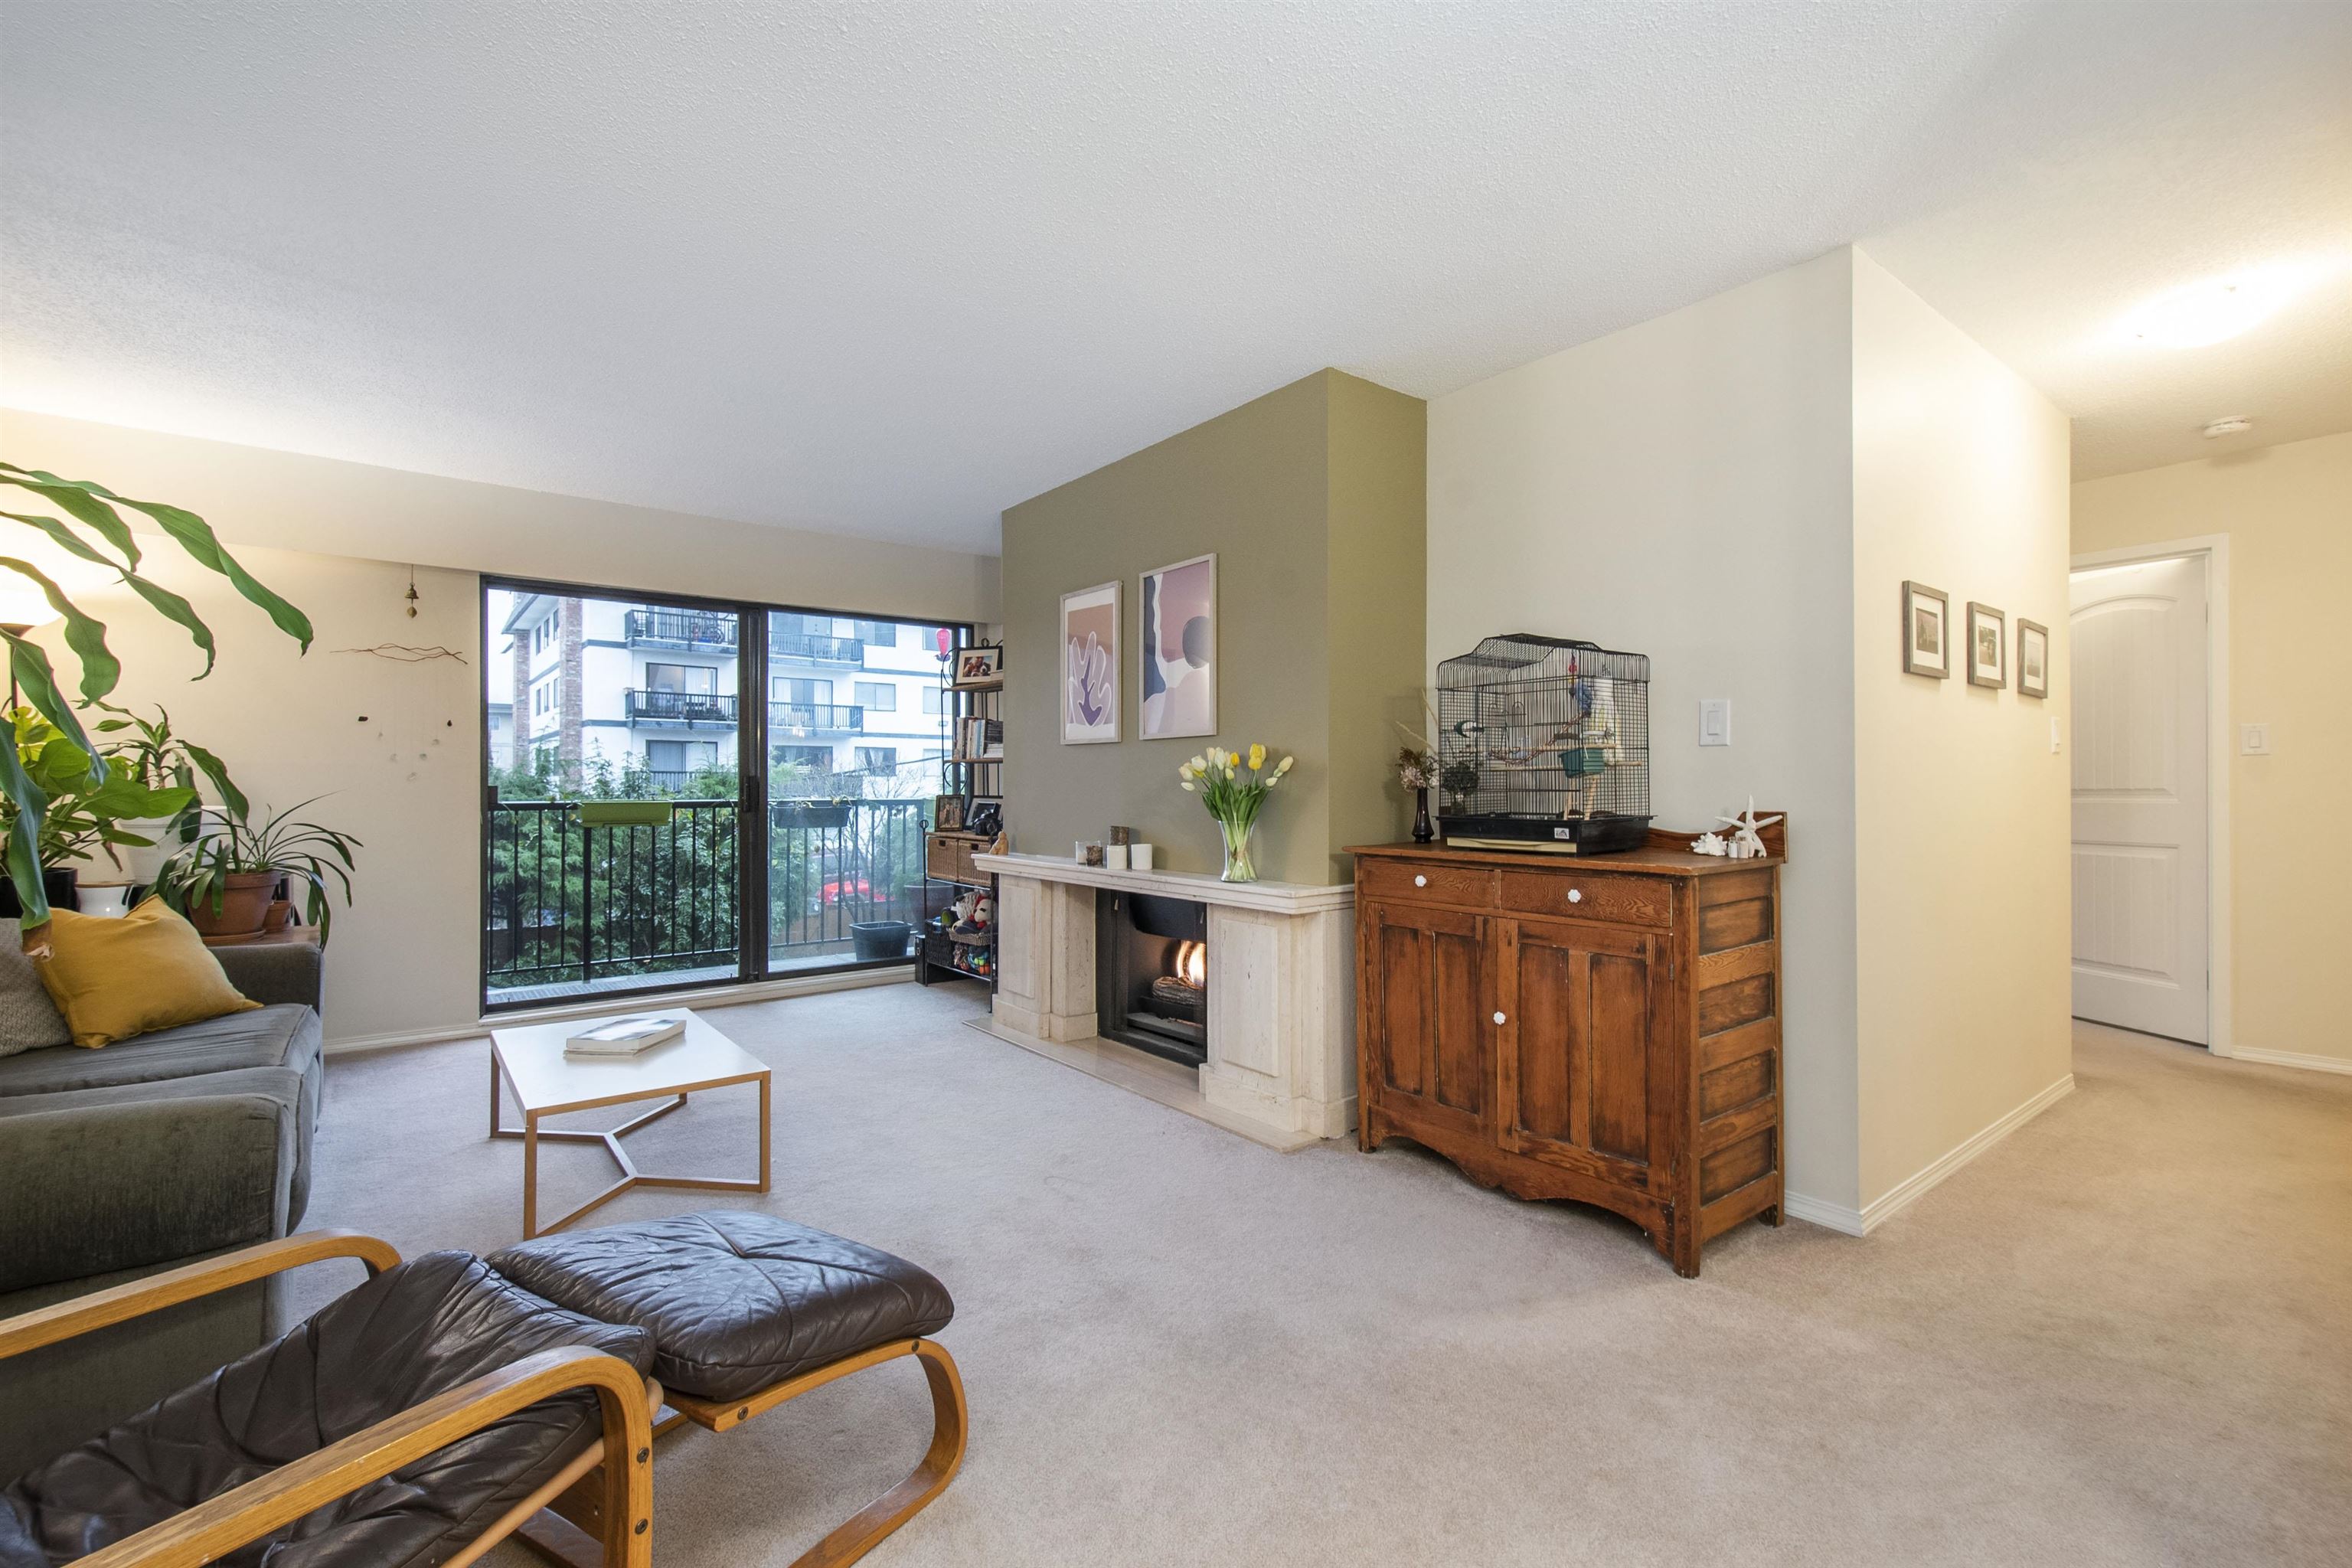 Central Lonsdale Apartment/Condo for sale:  2 bedroom 1,003 sq.ft. (Listed 6400-04-19)